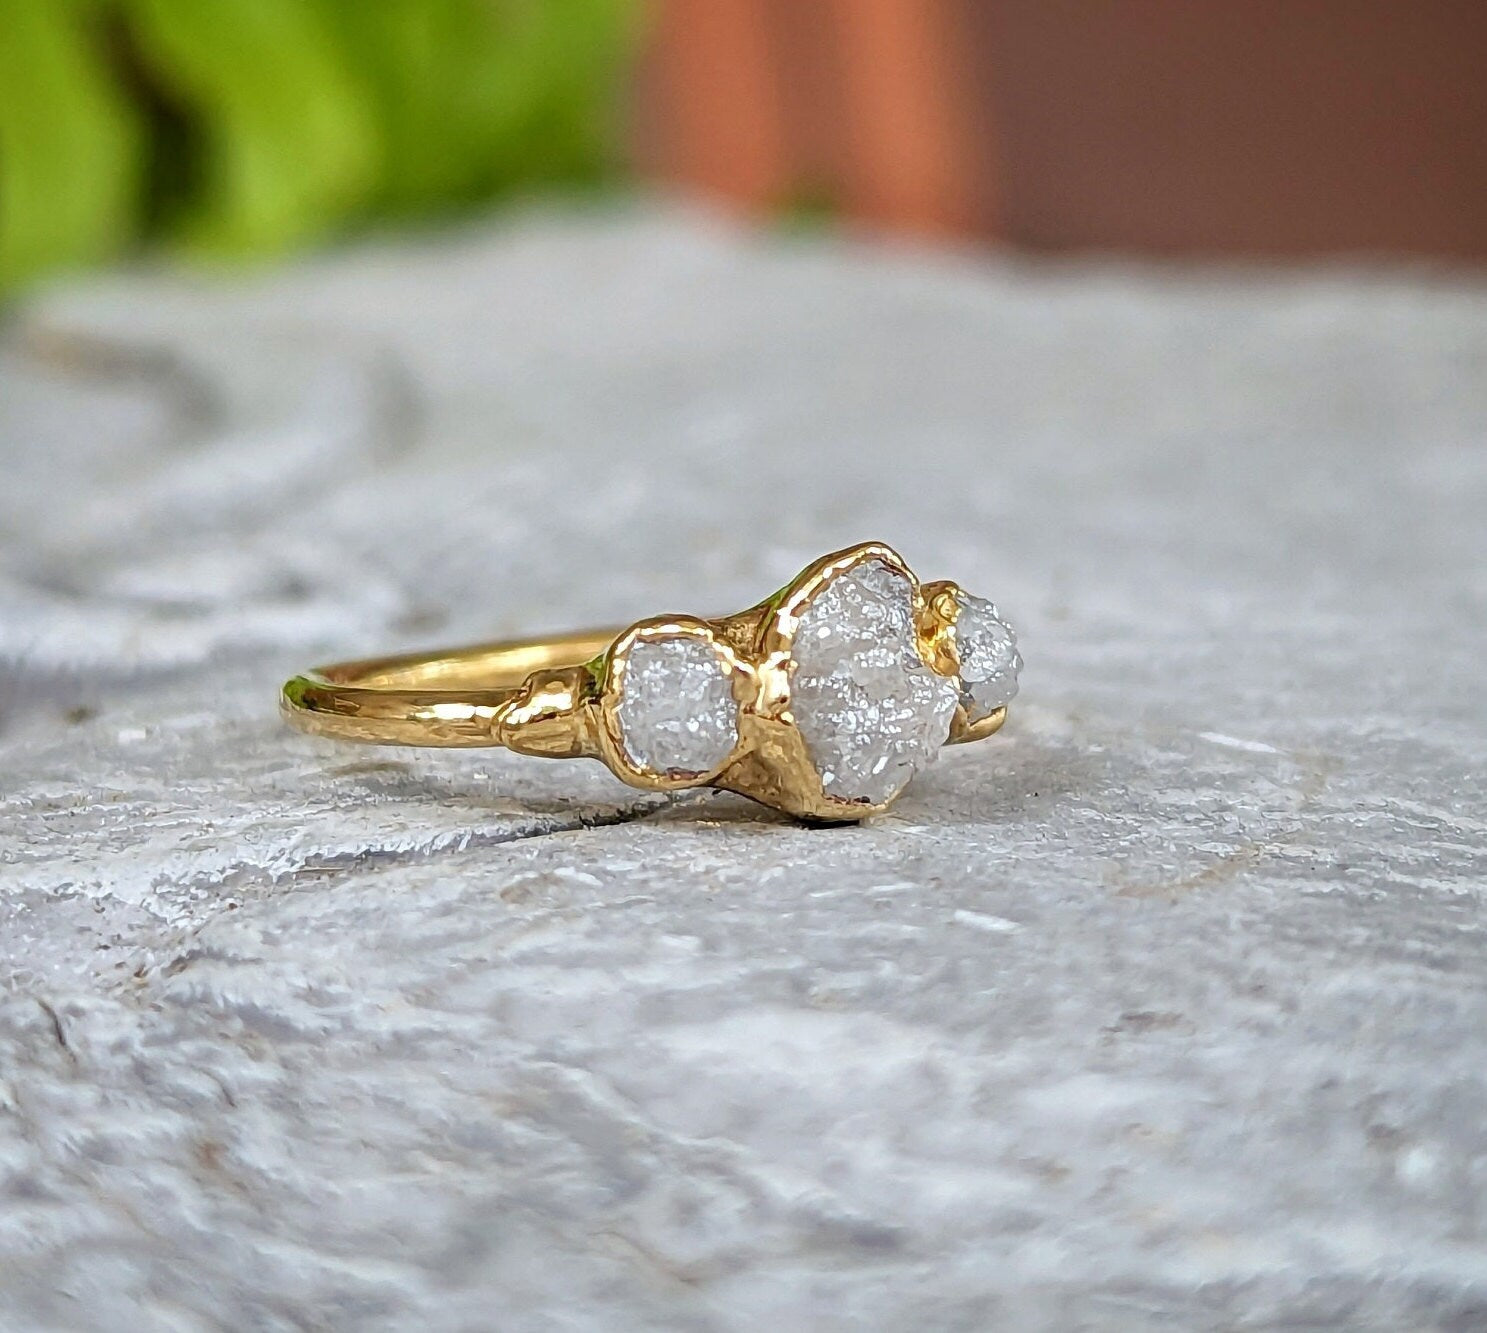 Raw uncut 3-diamond engagement ring in unique 18k Gold setting